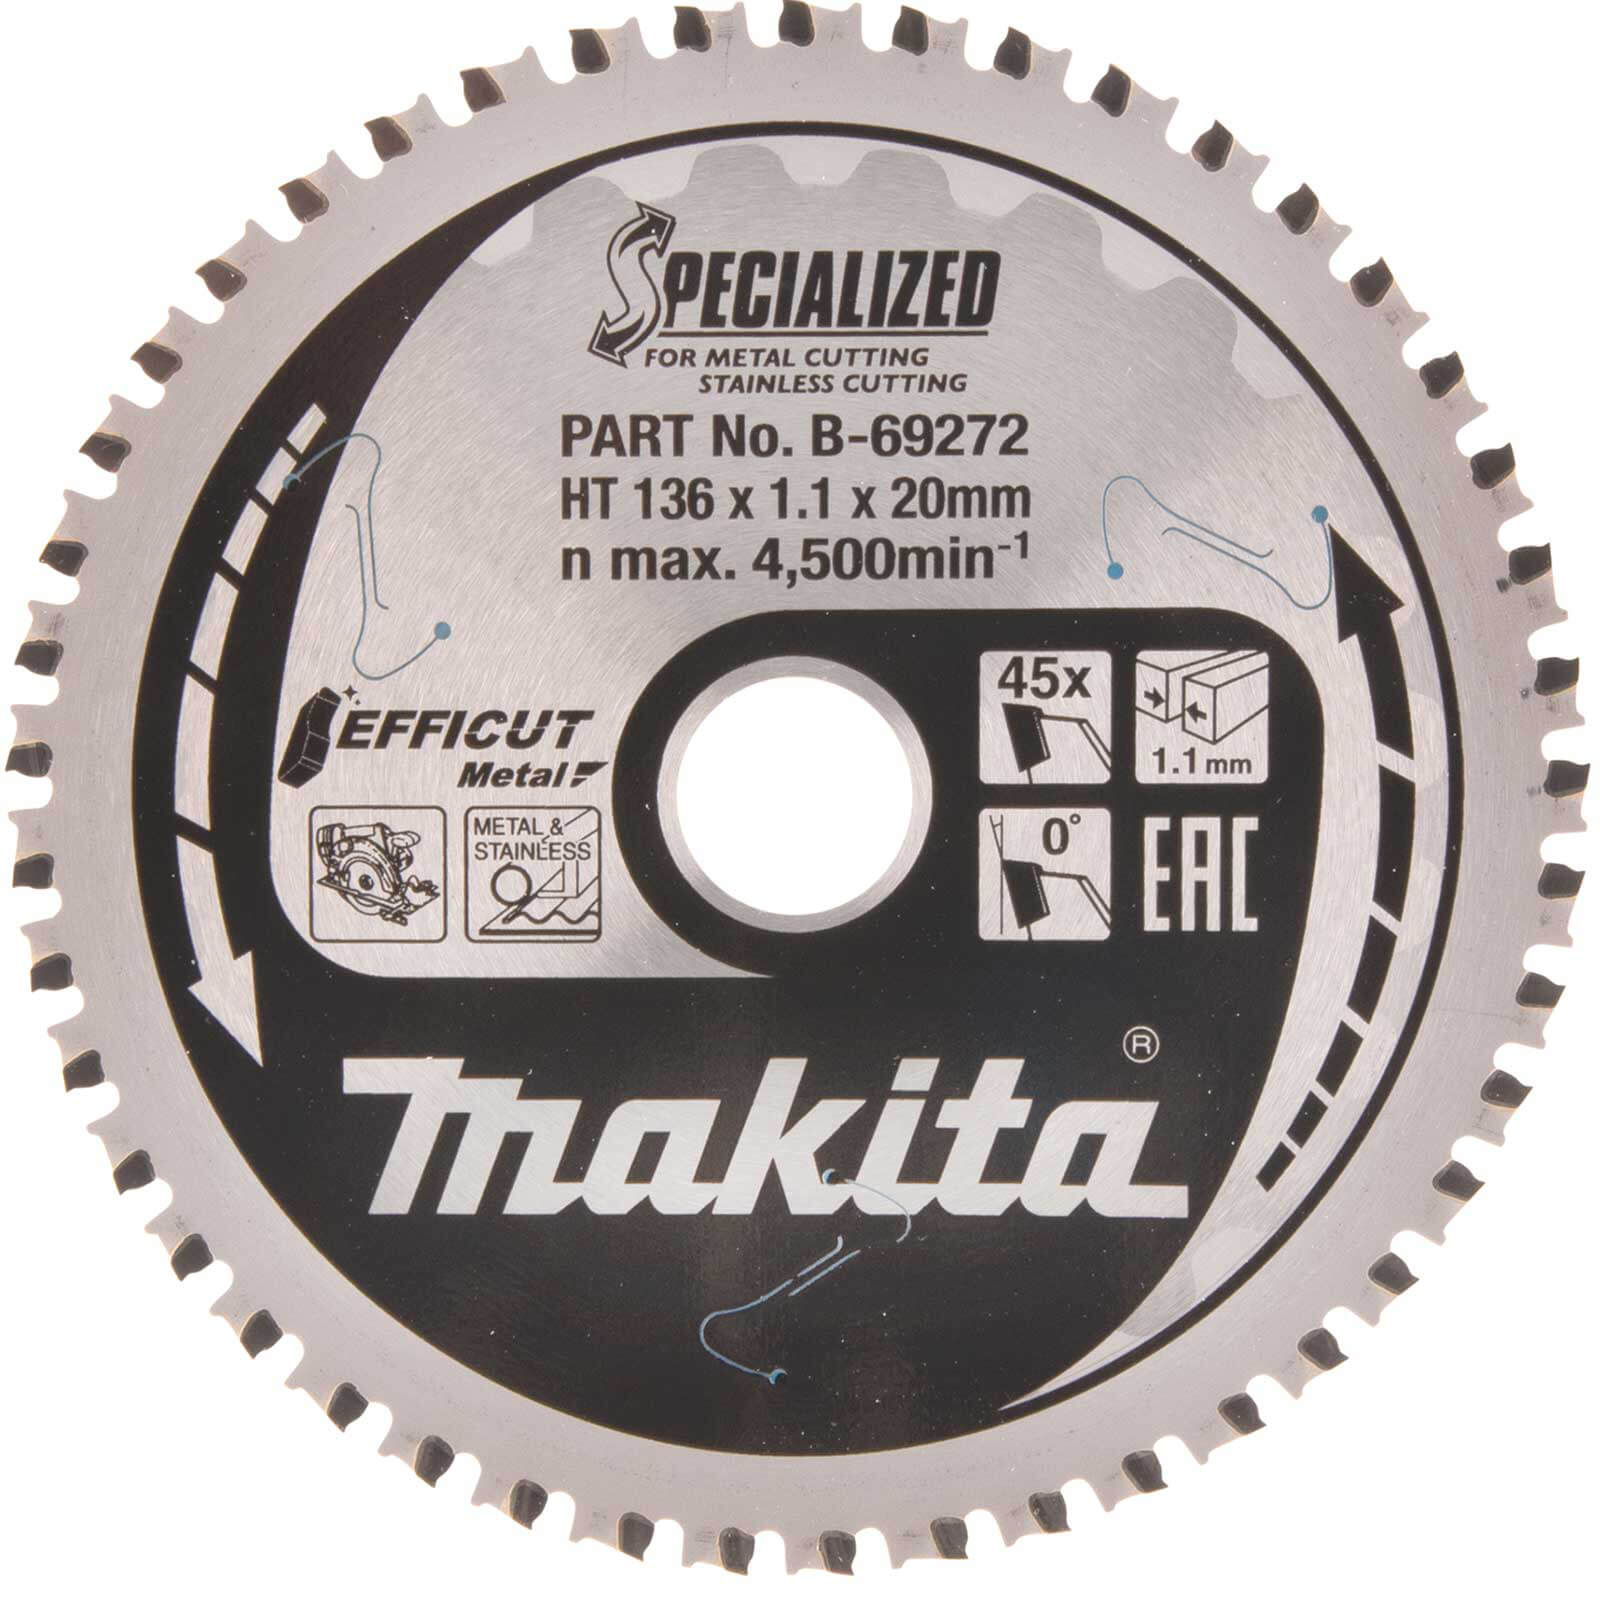 Photo of Makita Specialized Efficut Stainless Circular Saw Blade 136mm 45t 20mm